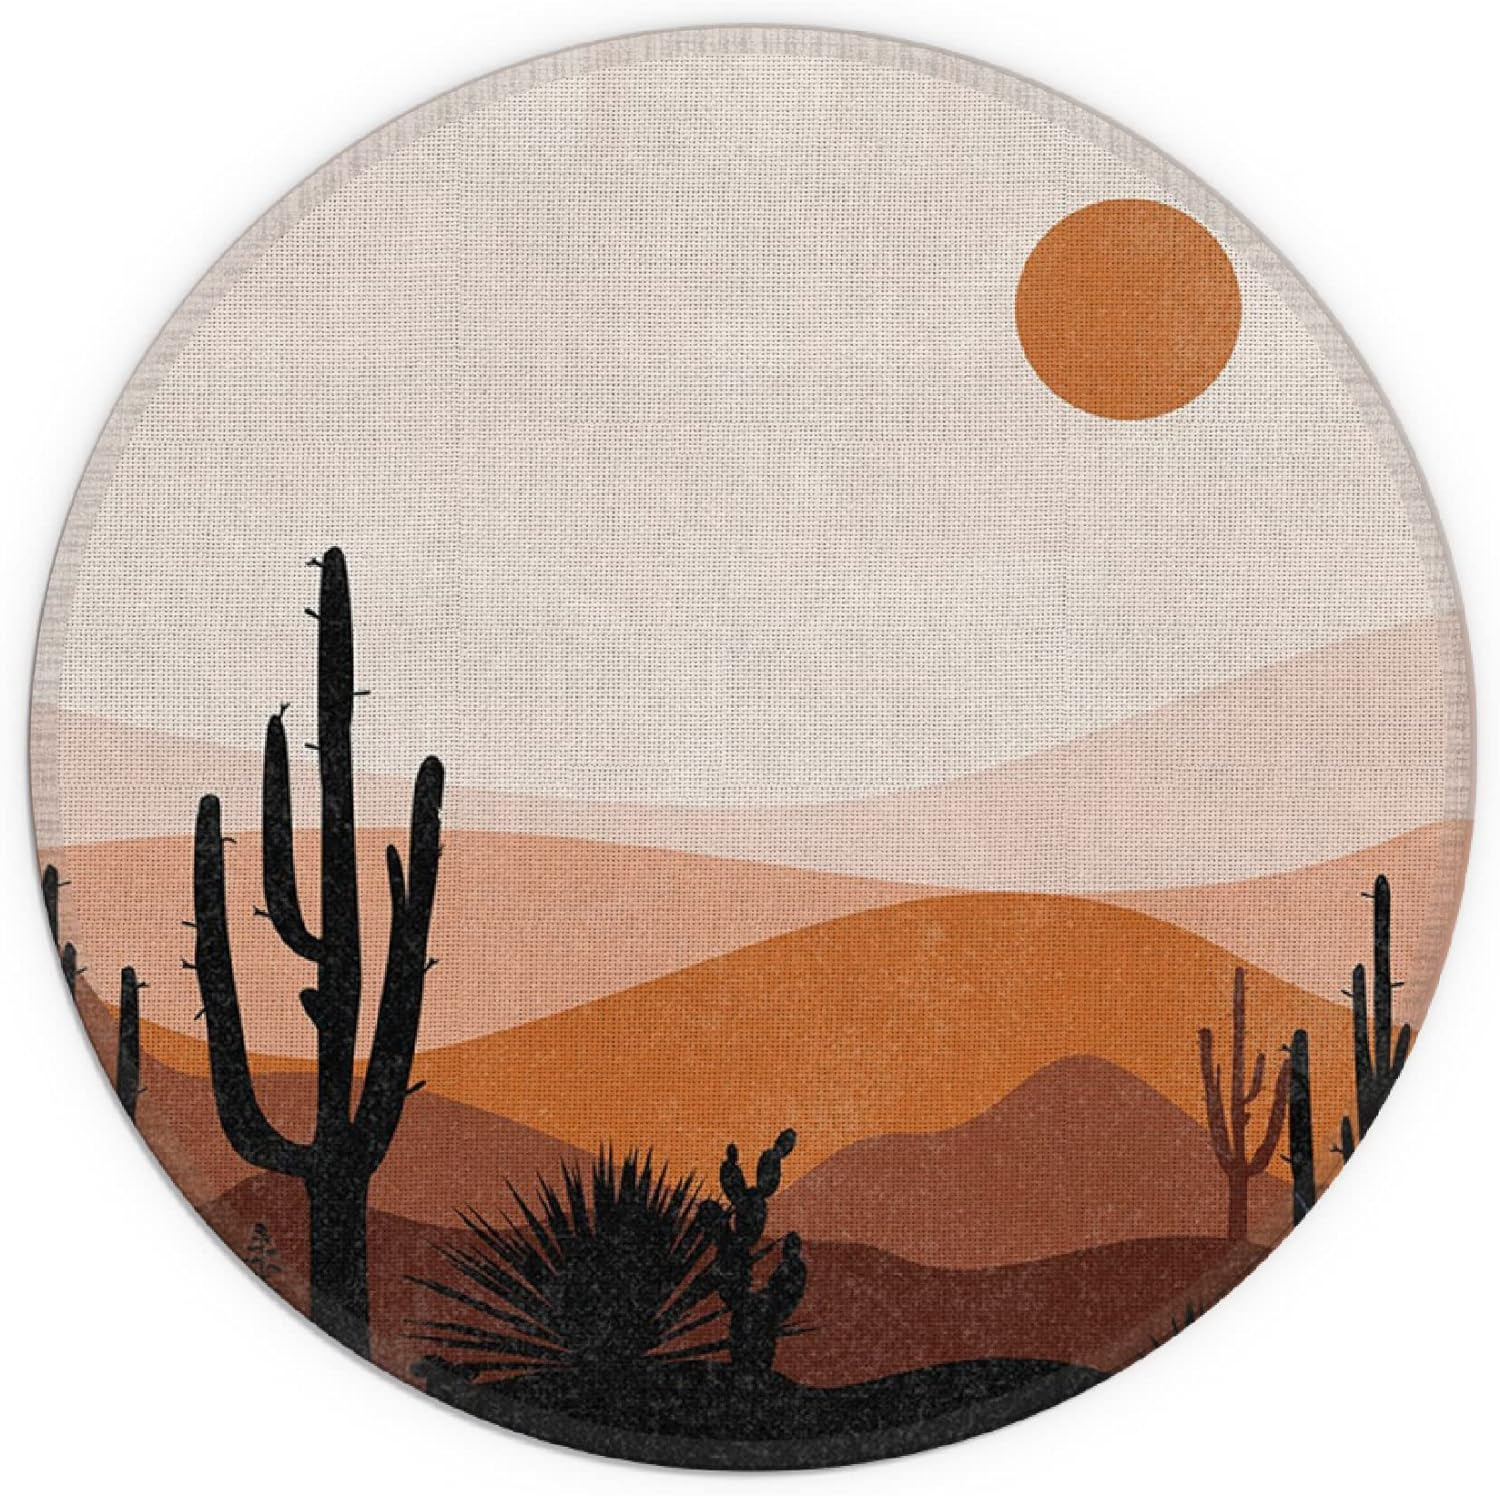 Desert Boho Mouse Pad, 7.9 X 7.9 Inch Waterproof Rubber Aesthetic Mouse Pad, Boh